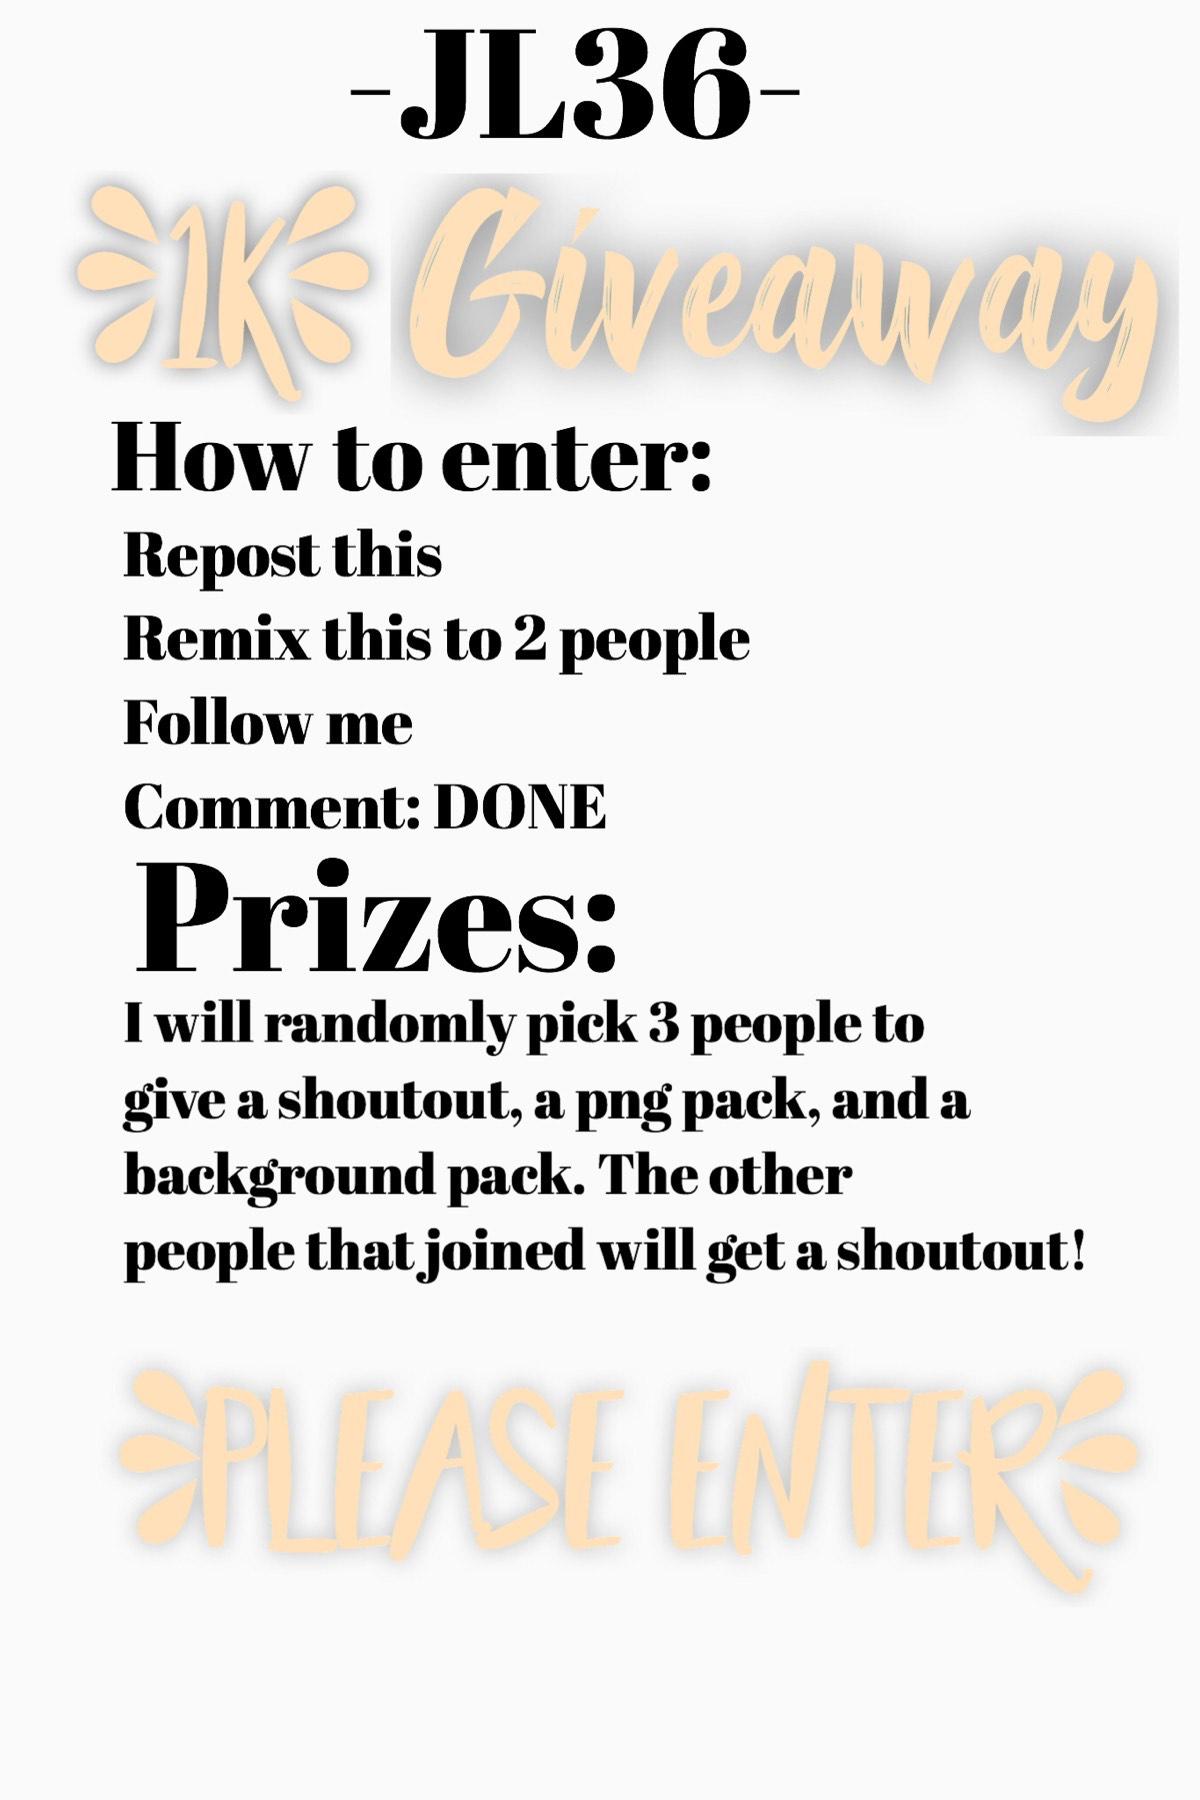 My giveaway! Please enter!